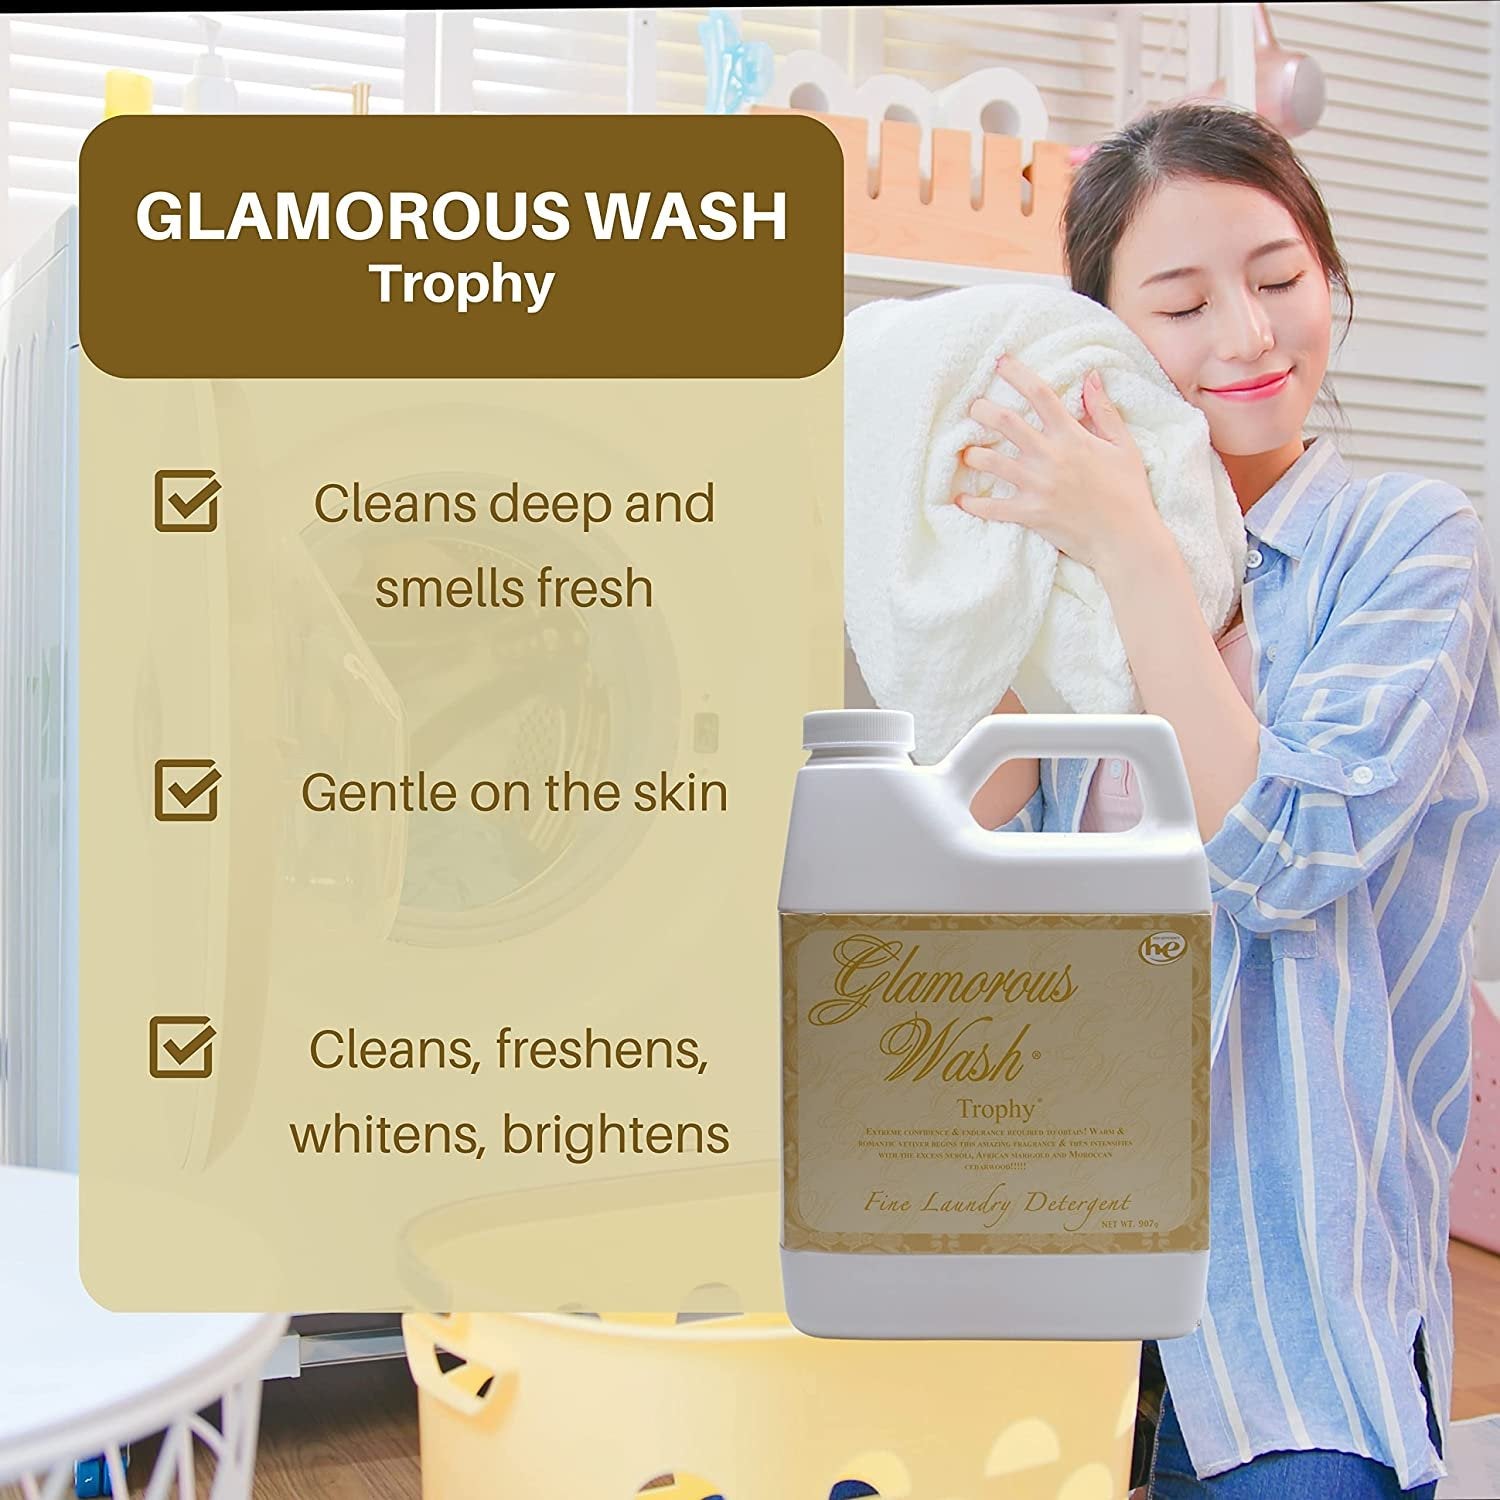 Tyler Candle Company Glamorous Wash Trophy Scent Fine Laundry Liquid Detergent - Liquid Laundry Detergent for Clothing - Hand and Machine Washable - 32 oz (907 g) Container w Bonus Key Chain